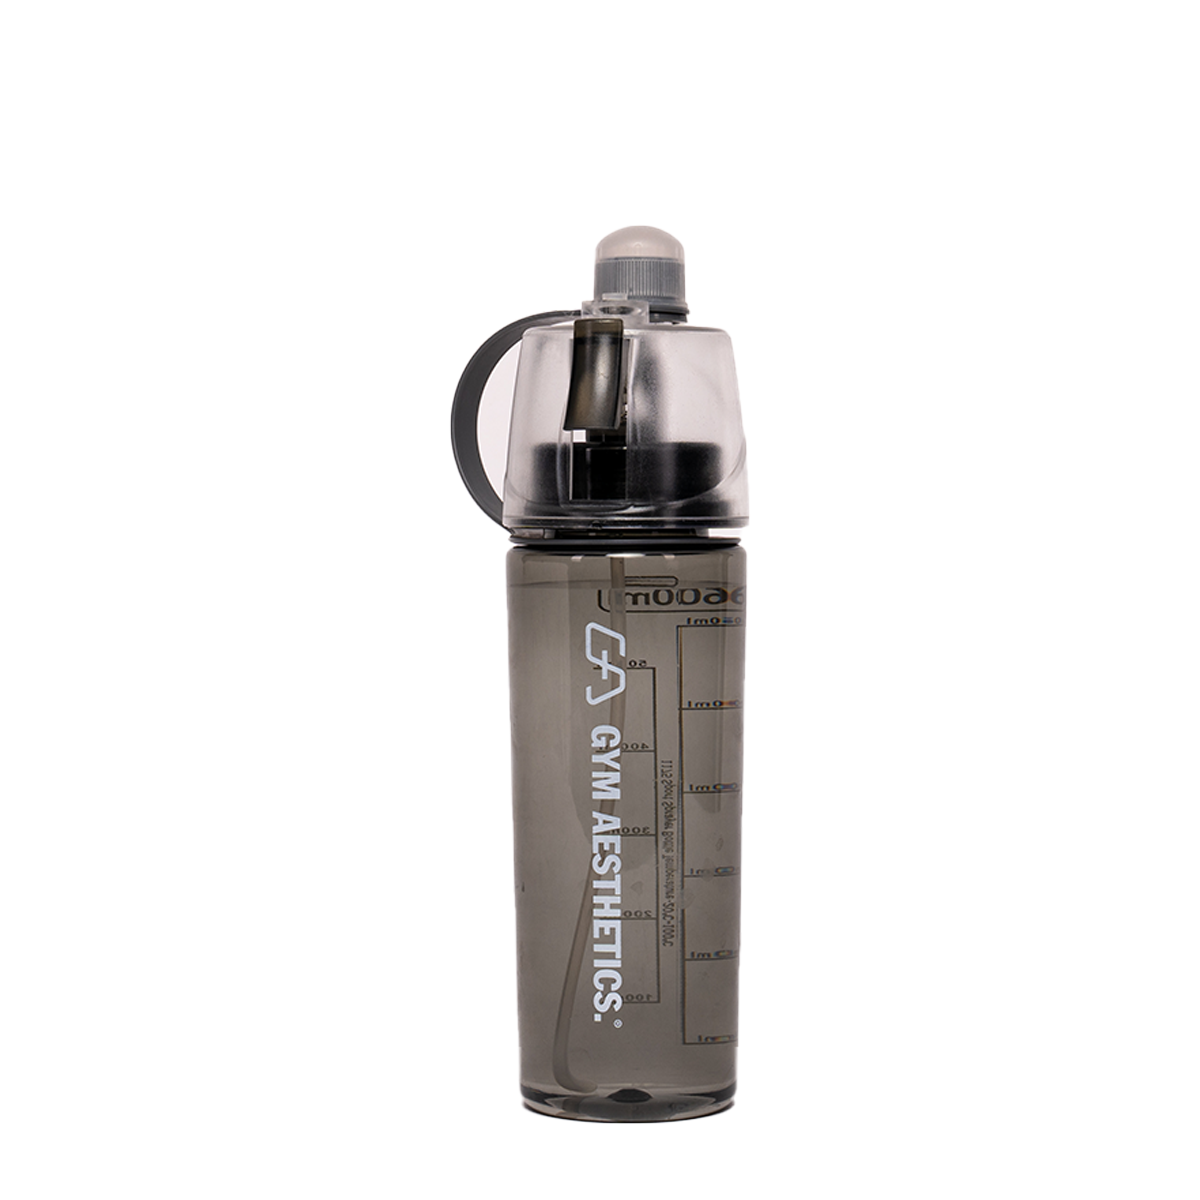 Dropship Misting Water Bottle For Sports And Outdoor Activities - BPA-Free  Food Grade Plastic With Spray Mist - Portable And Convenient For Office, Gym,  Running, Biking, And Workout to Sell Online at